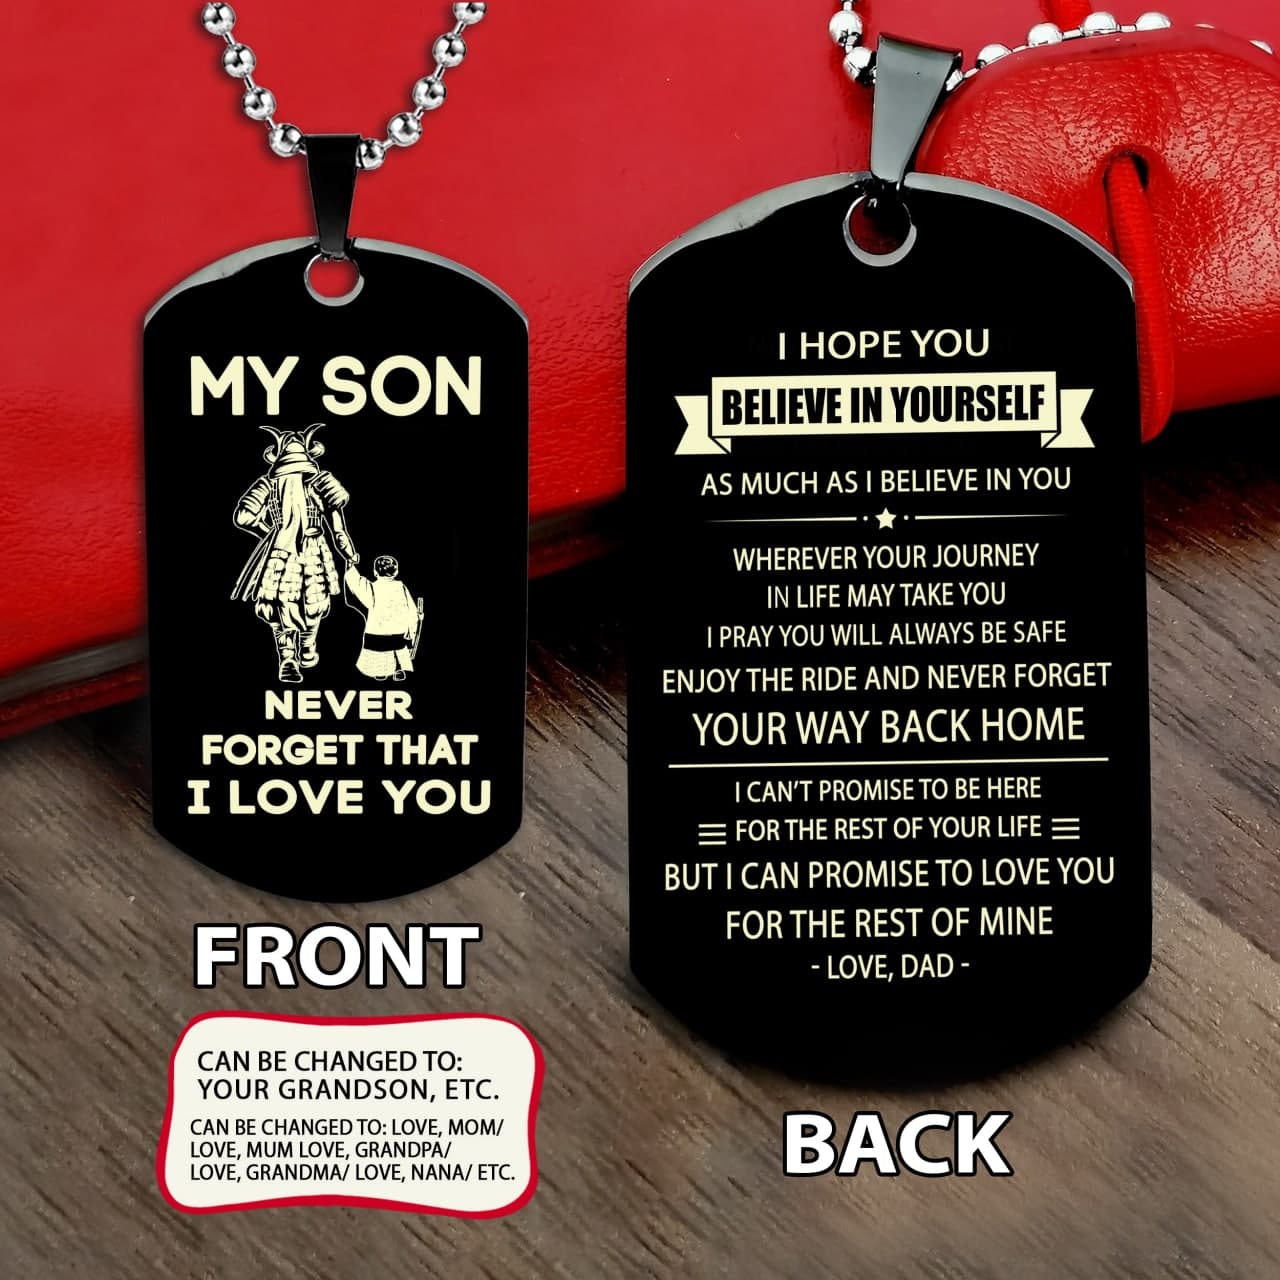 Samurai customizable engraved dog tag, gifts from dad mom to son- Be the nice kid